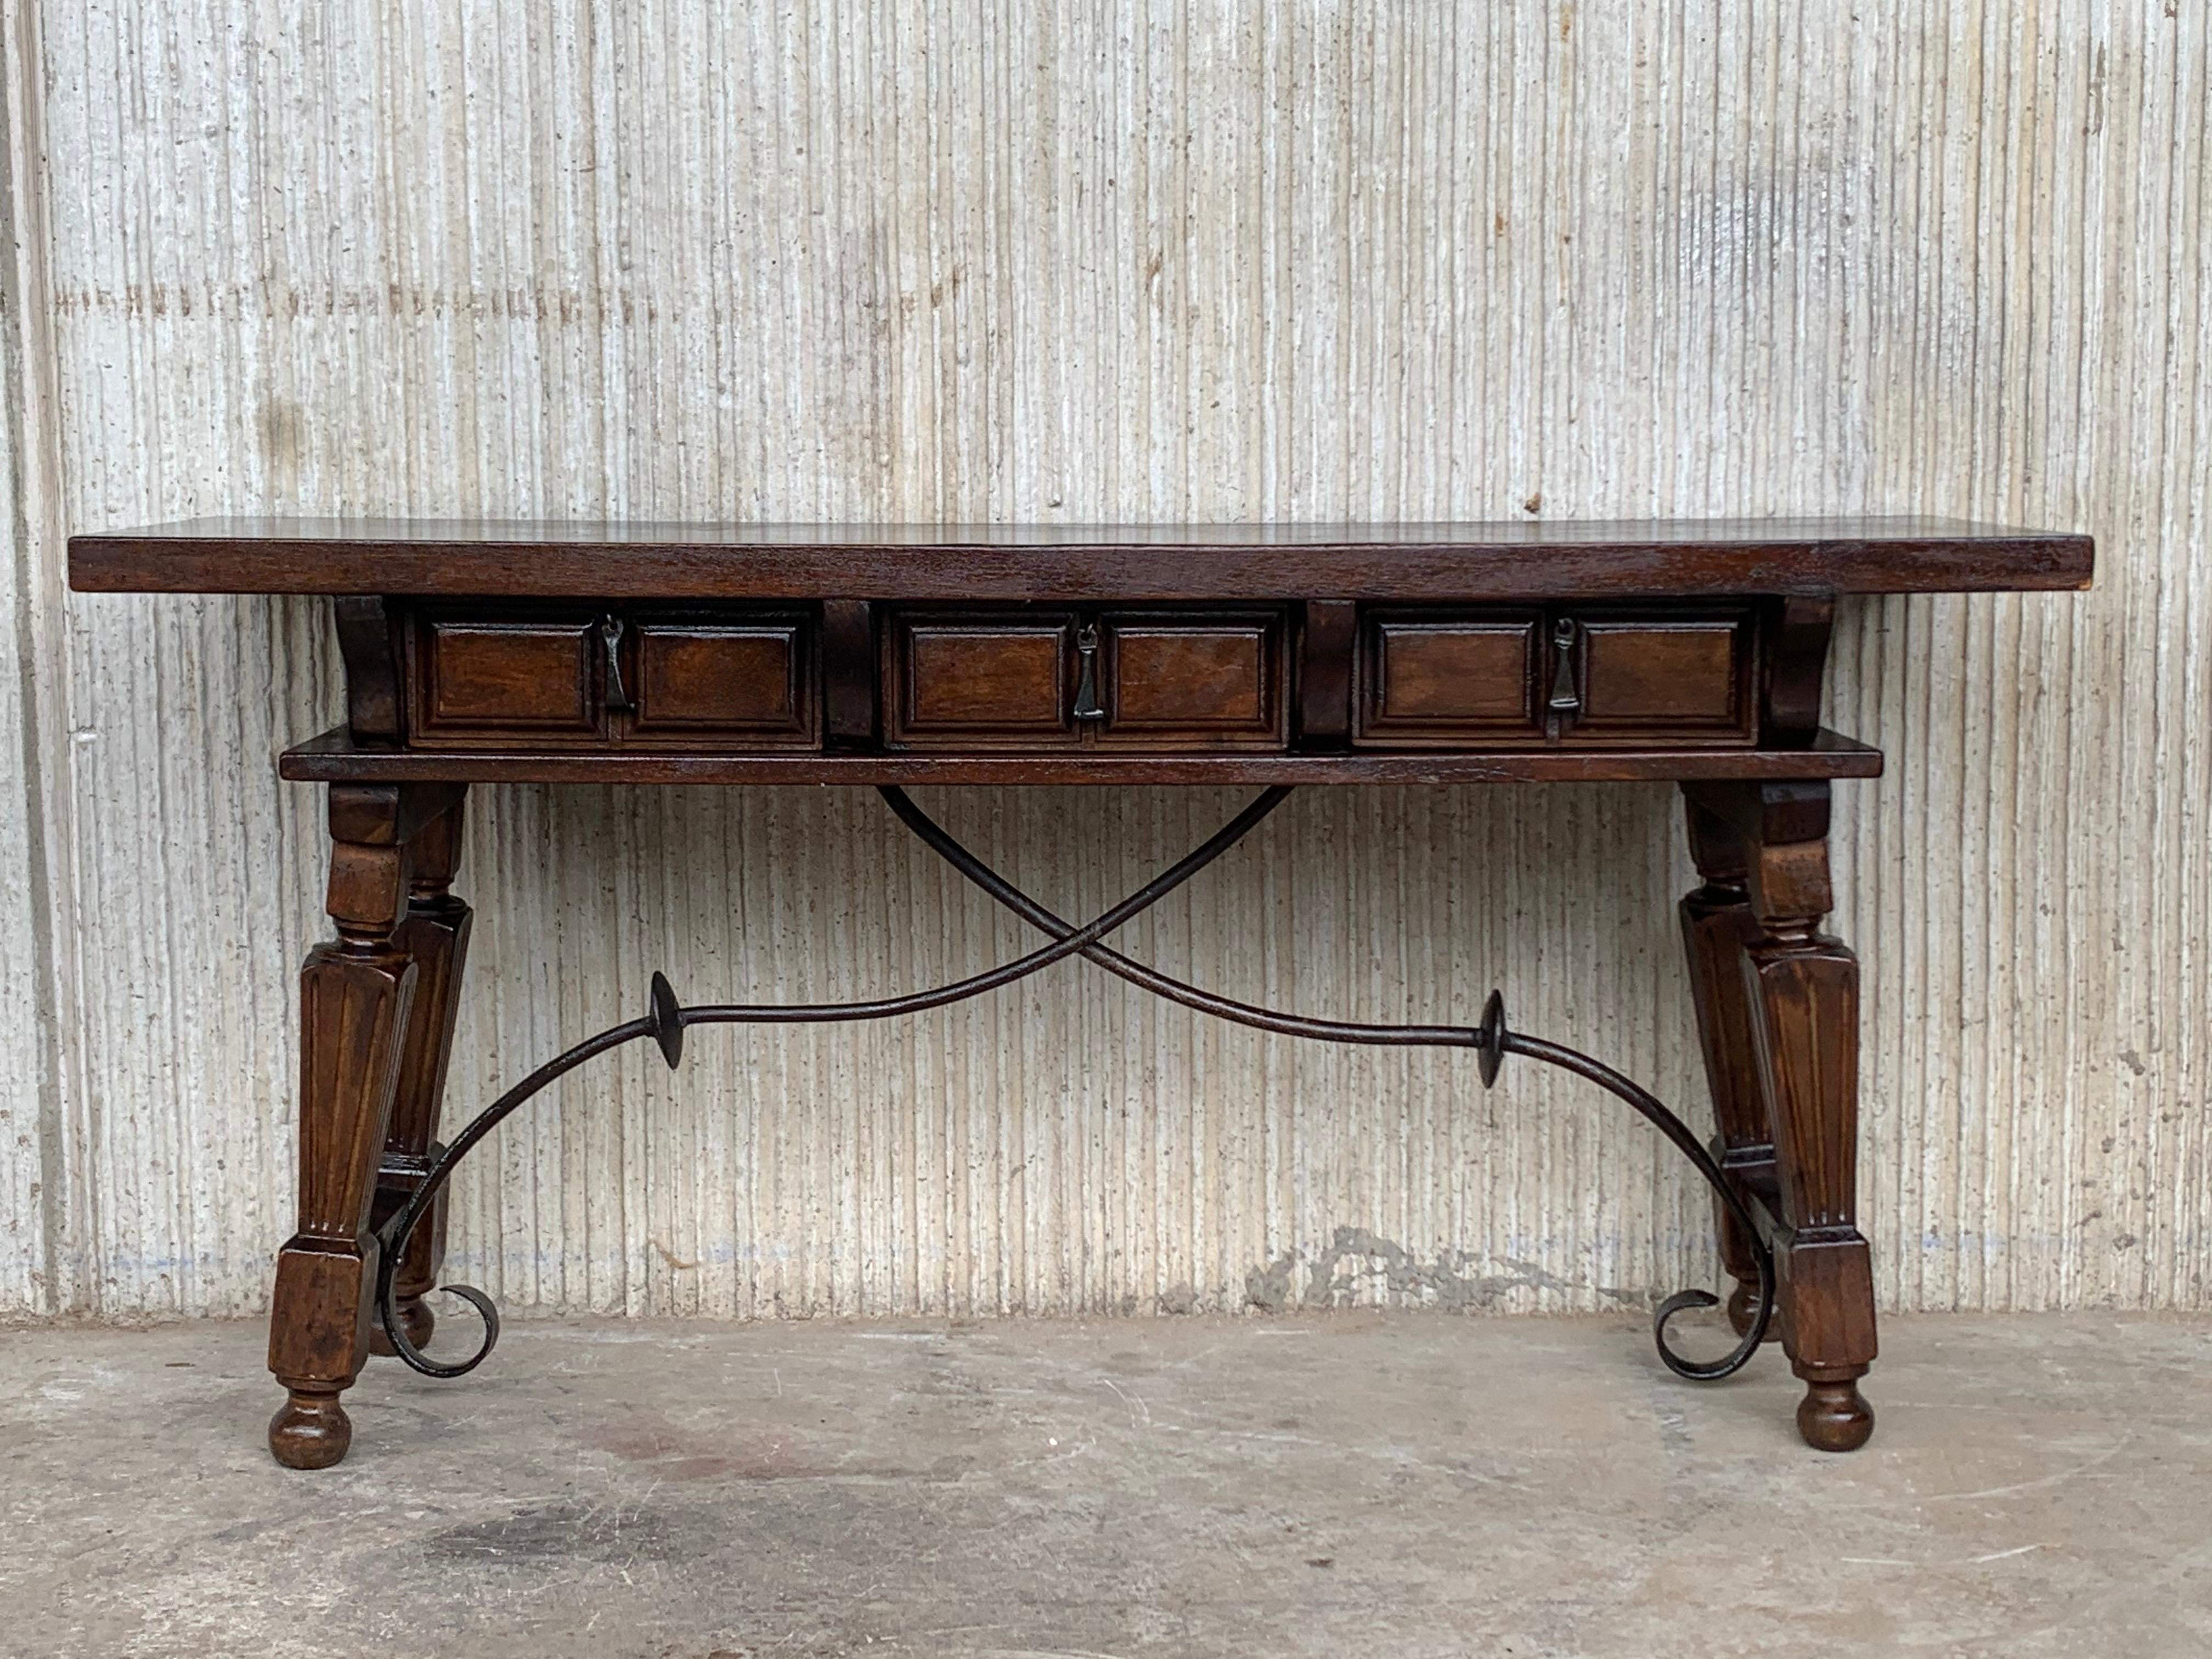 19th century Spanish bench or low console table with three carved drawers you can open in both sides
Original iron pull hardware and iron stretcher
That back has the same picture than the front.